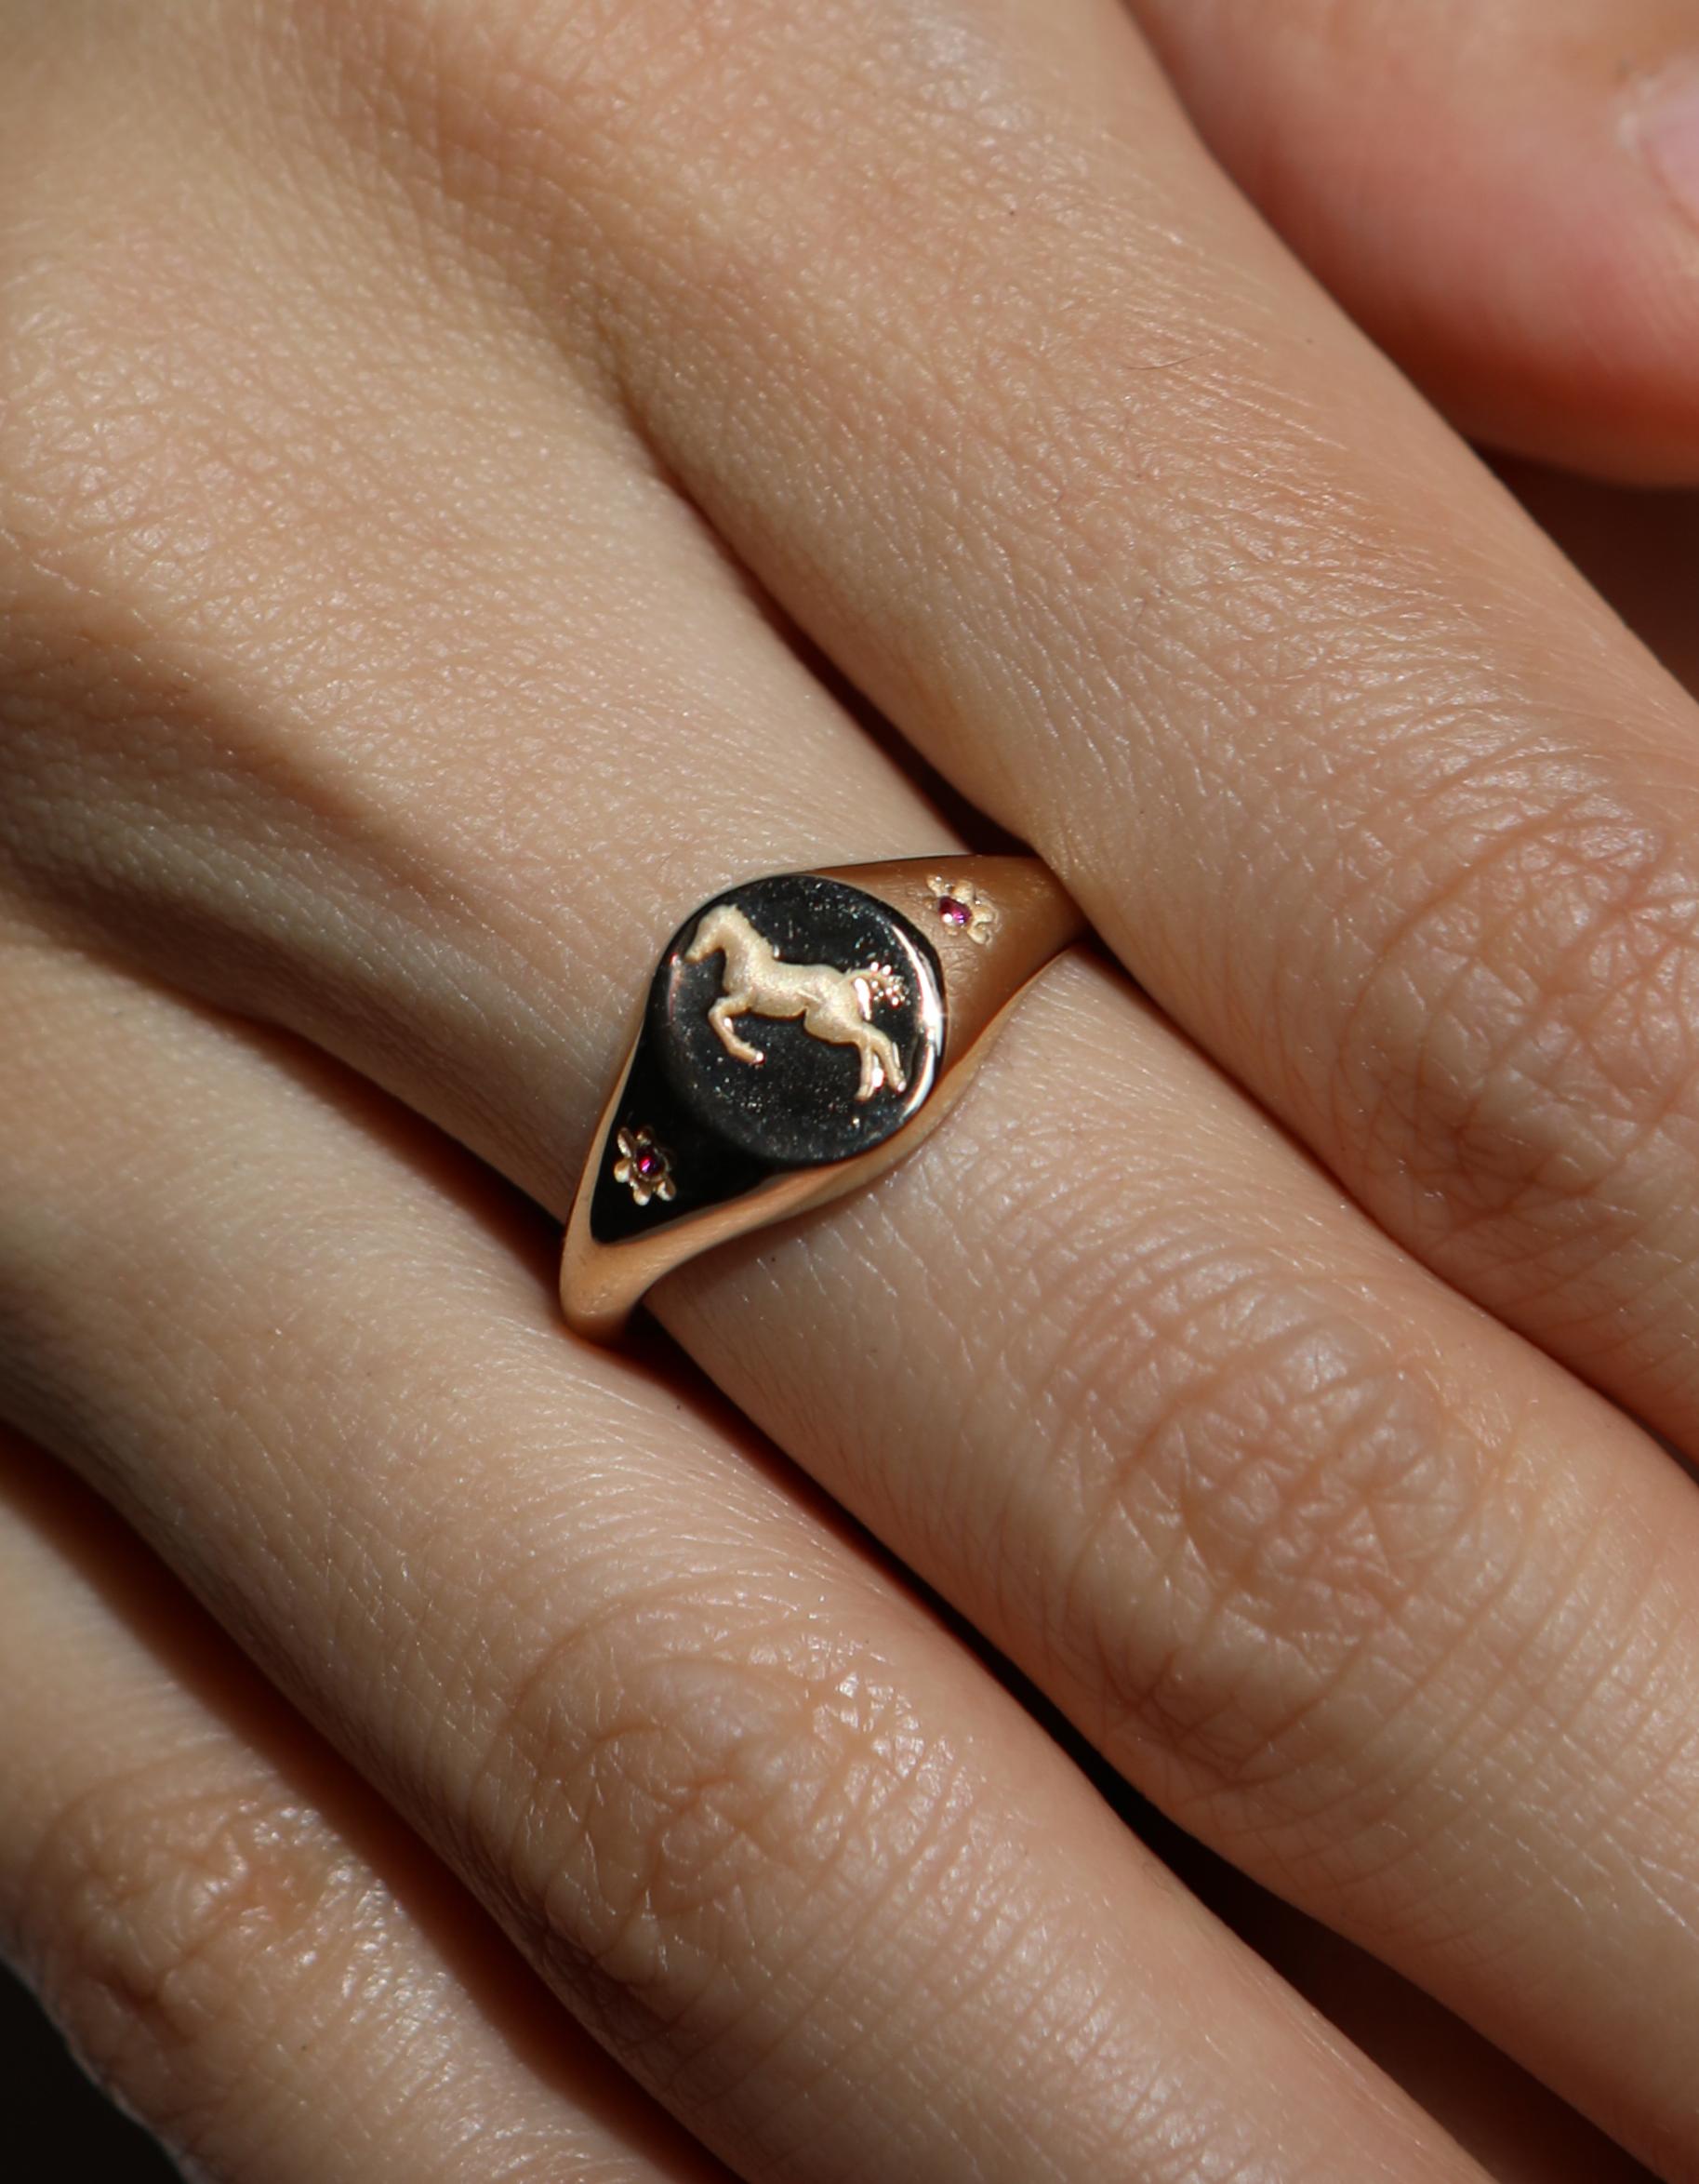 For Sale:  Ruth Nyc x Tea Leigh Pony Signet Ring, 14k Yellow Gold with Rubies 4